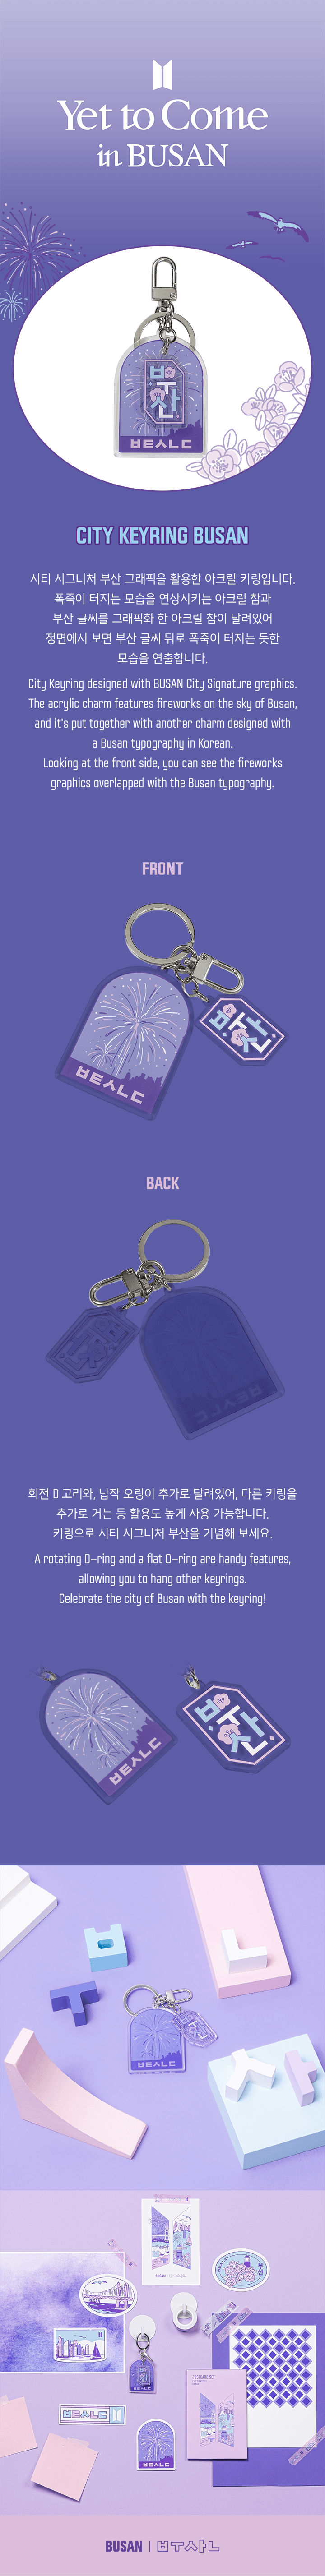 BTS [Yet To Come] City Keyring Busan